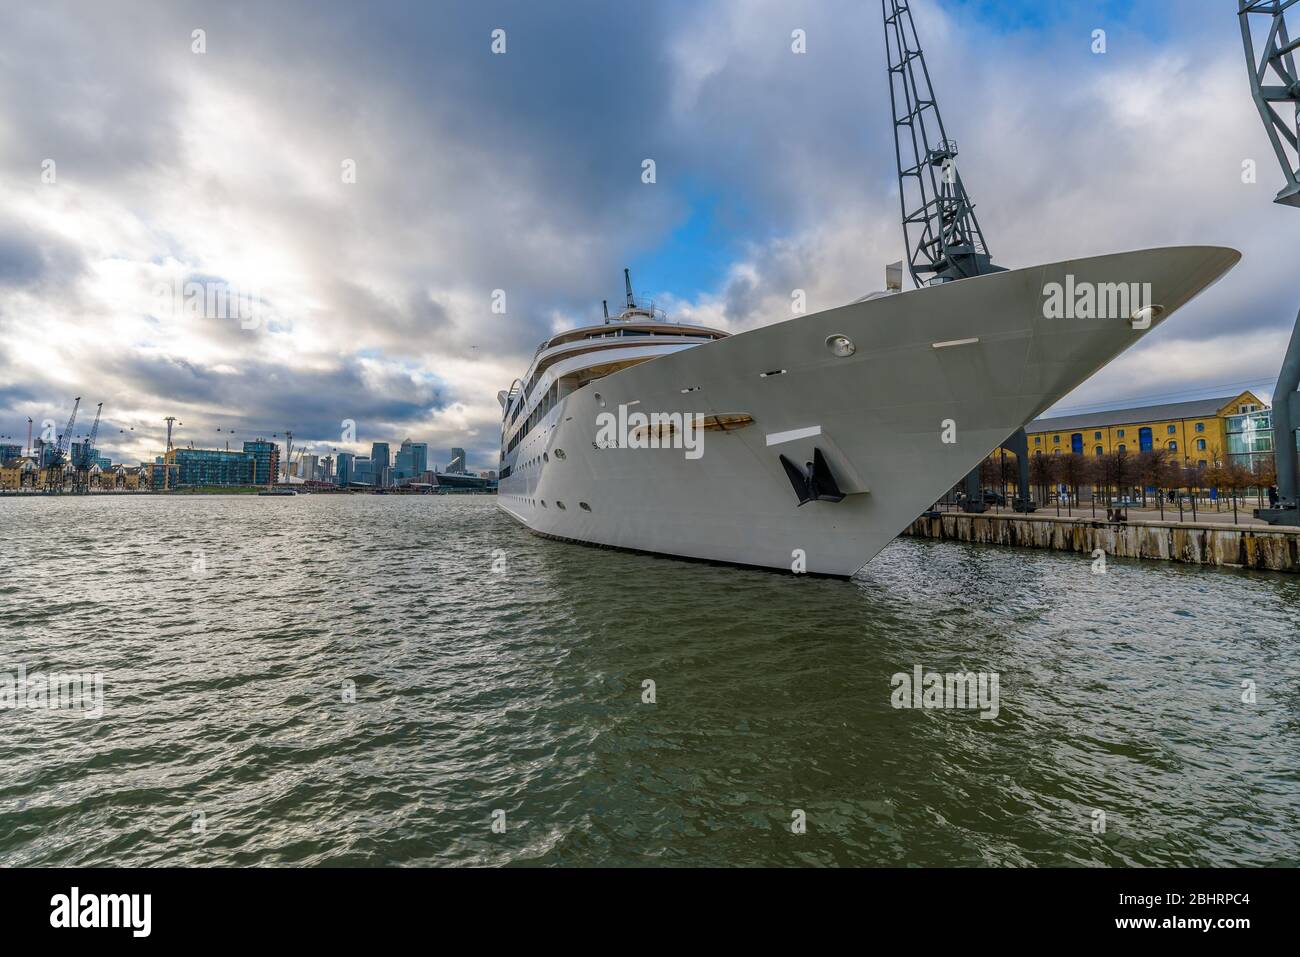 The Sunborn London, England, yacht hotel with rooms and suites with touch controls and spa. Gallions reach Marina next to the Excel Exhibition Centre. Stock Photo